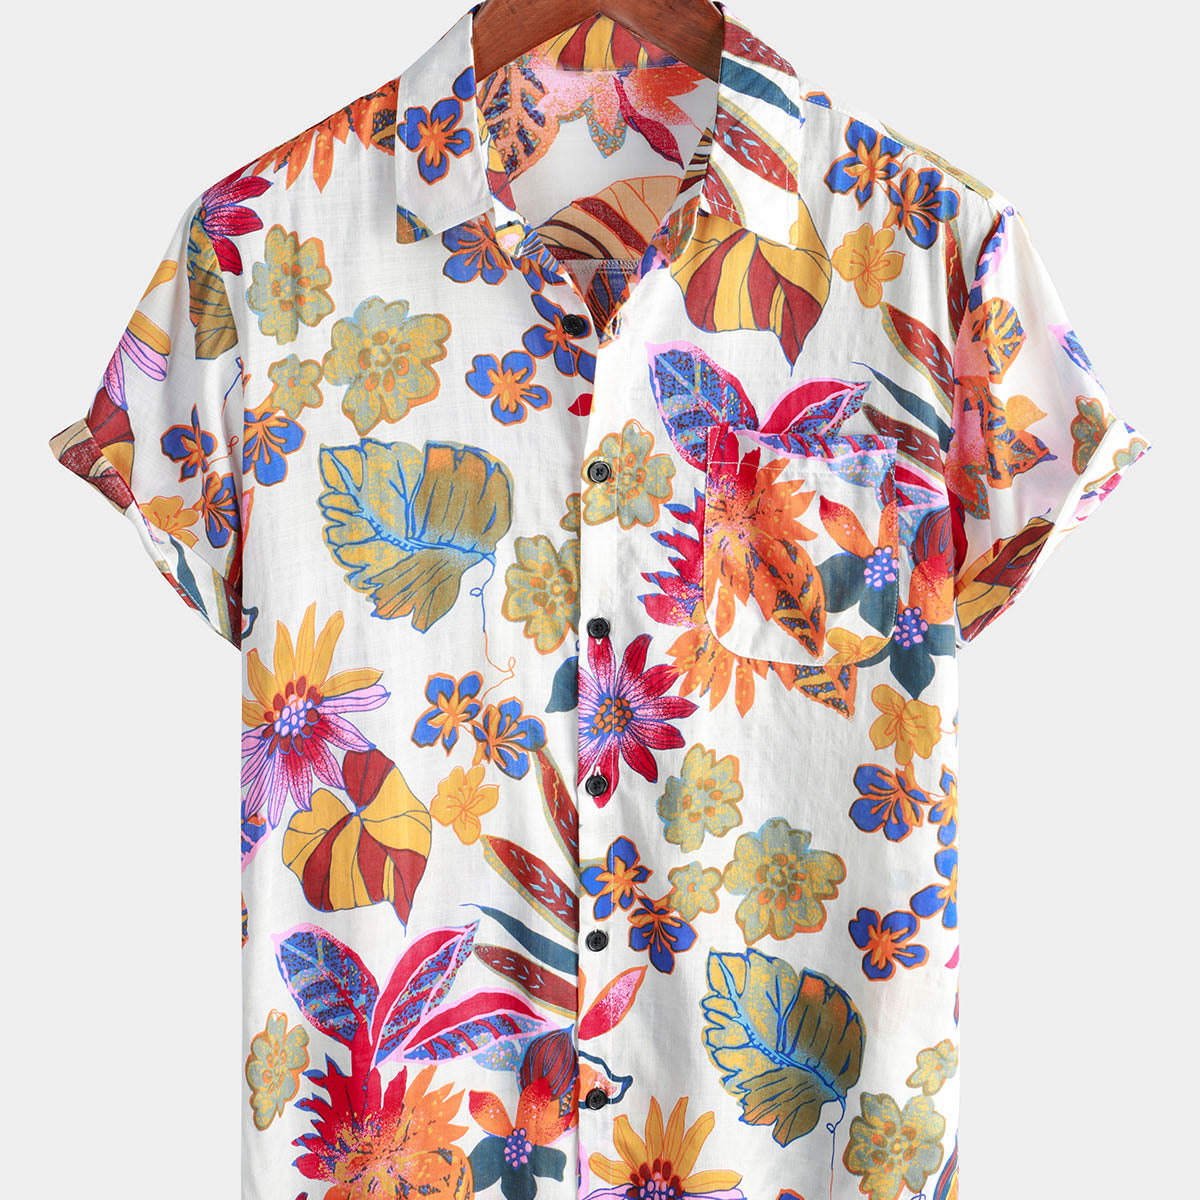 Men's Summer Colorful Floral Casual Vacation Flower Button Short Sleeve Summer Shirt